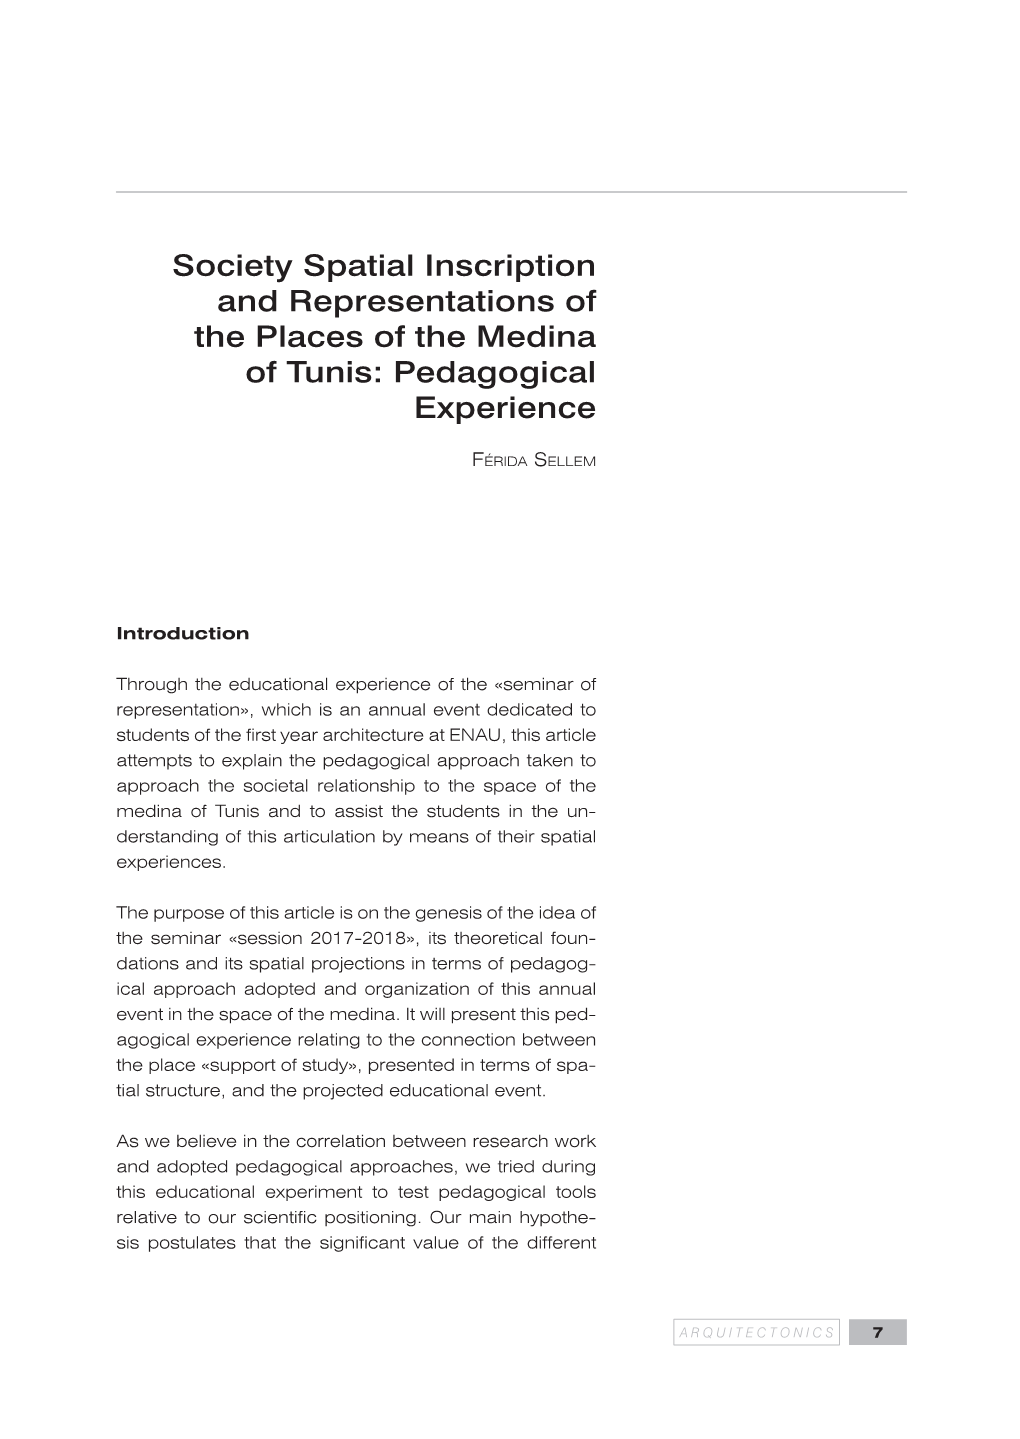 Society Spatial Inscription and Representations of the Places of the Medina of Tunis: Pedagogical Experience